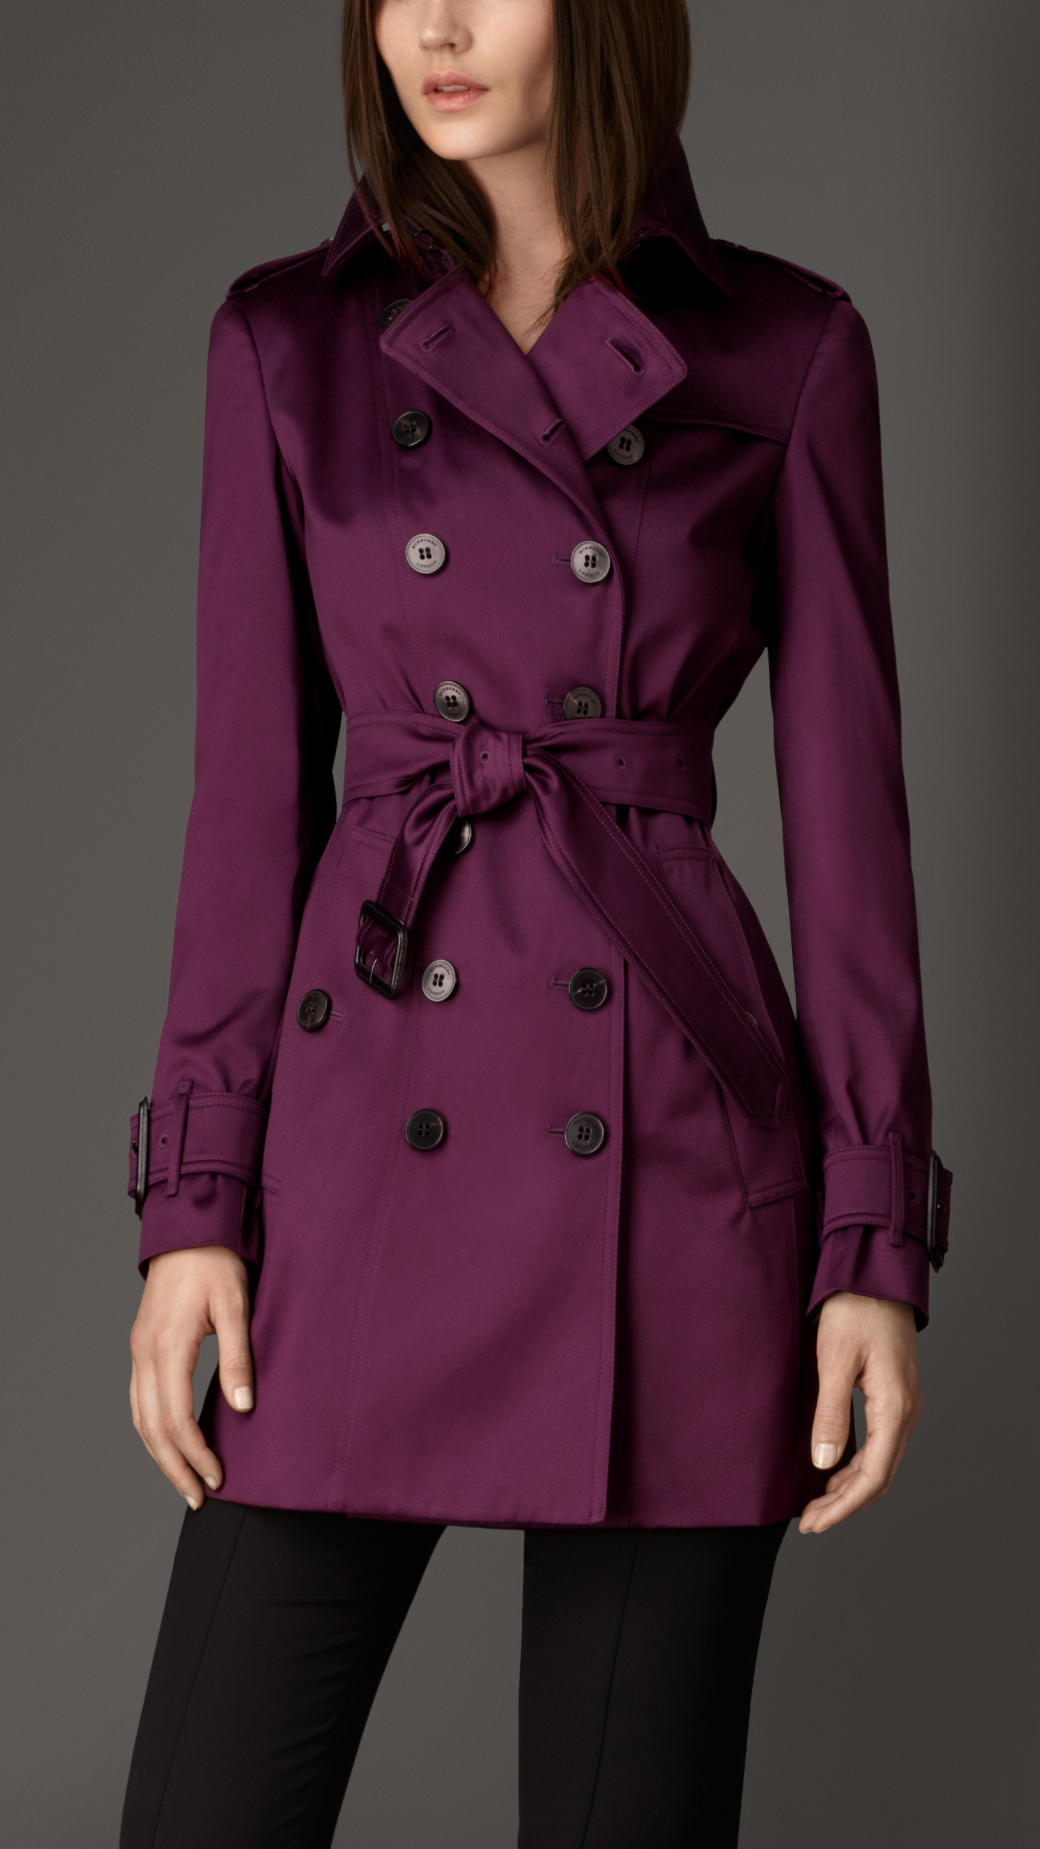 Lyst - Burberry Midlength Cotton Sateen Trench Coat in Purple